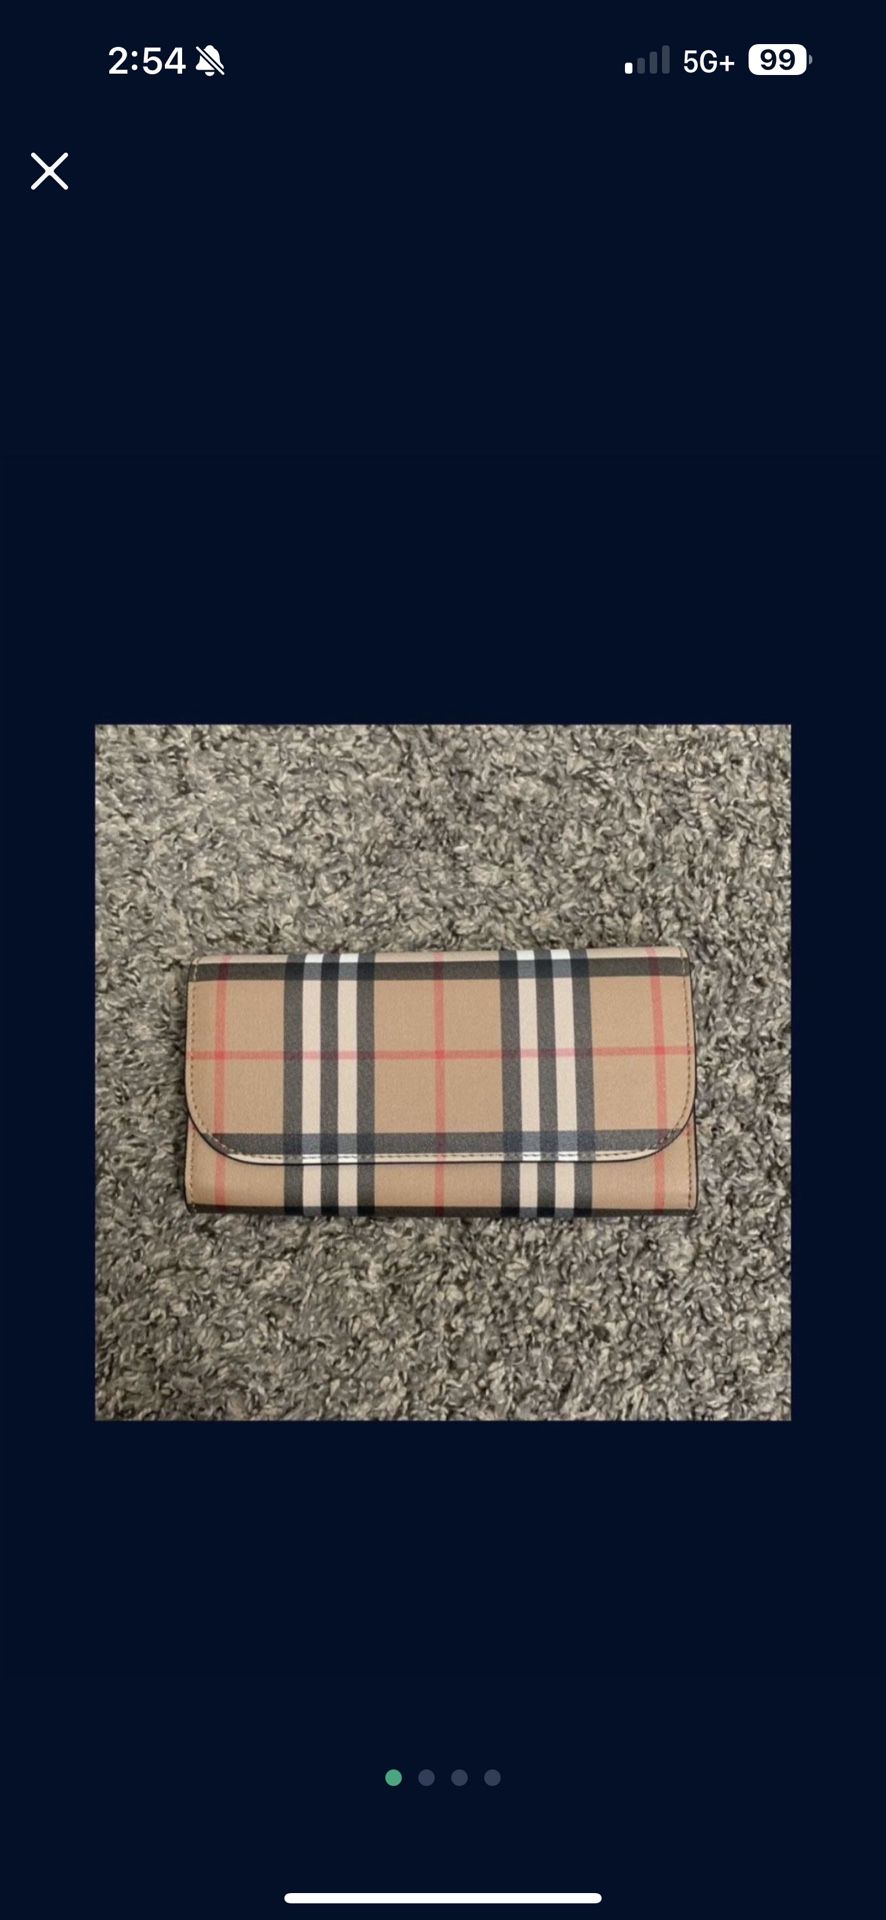 Authentic Burberry Wallet